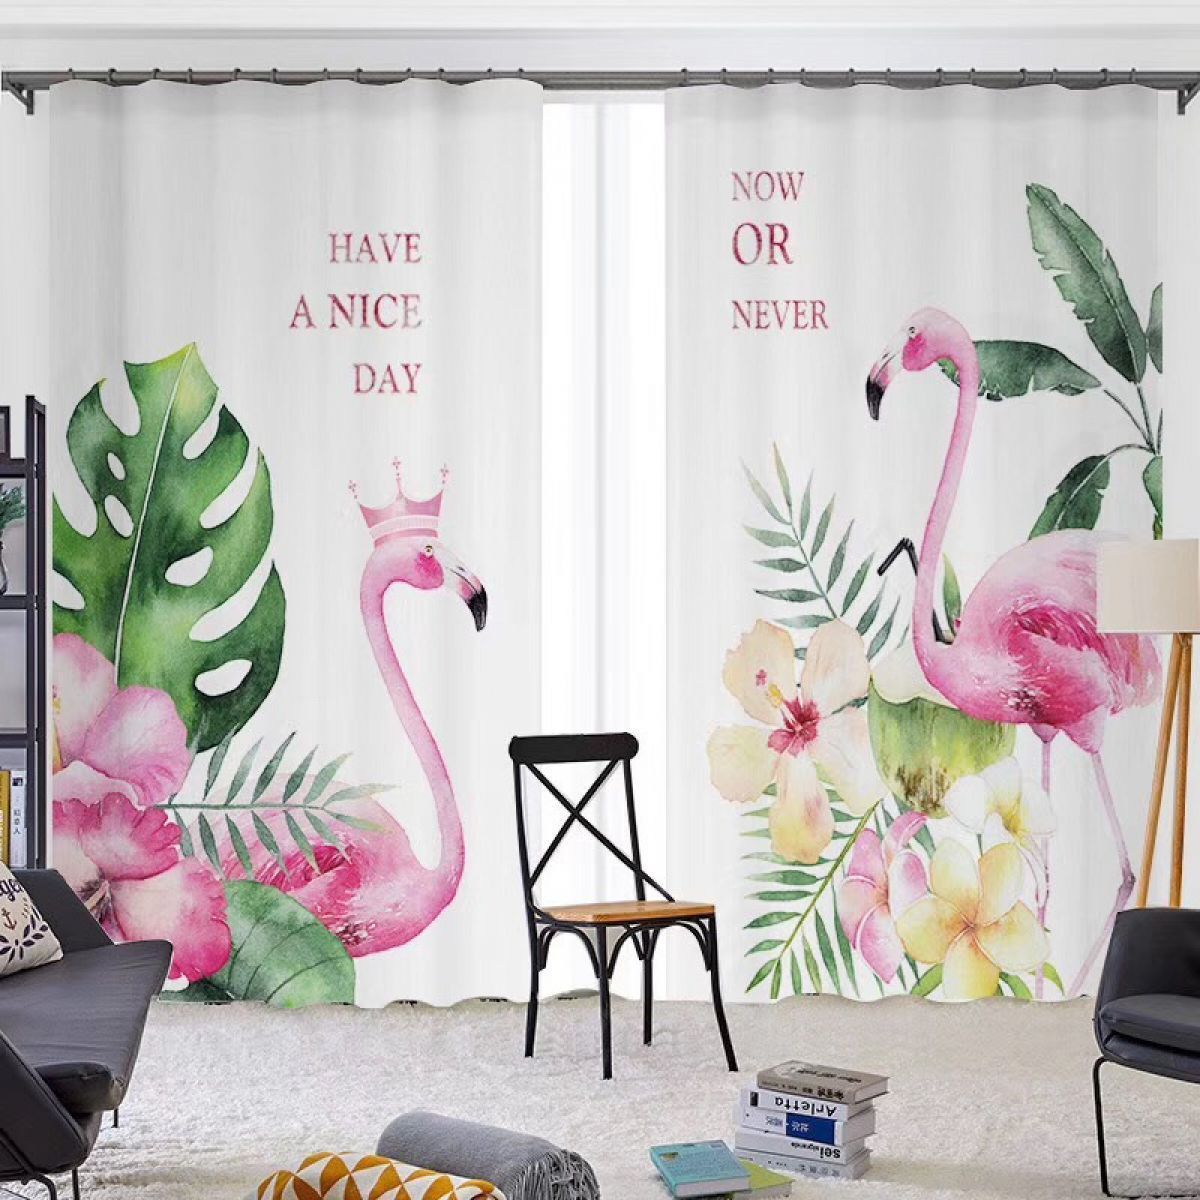 3d Flamingos And Leaves Now Or Never Printed Window Curtain Home Decor